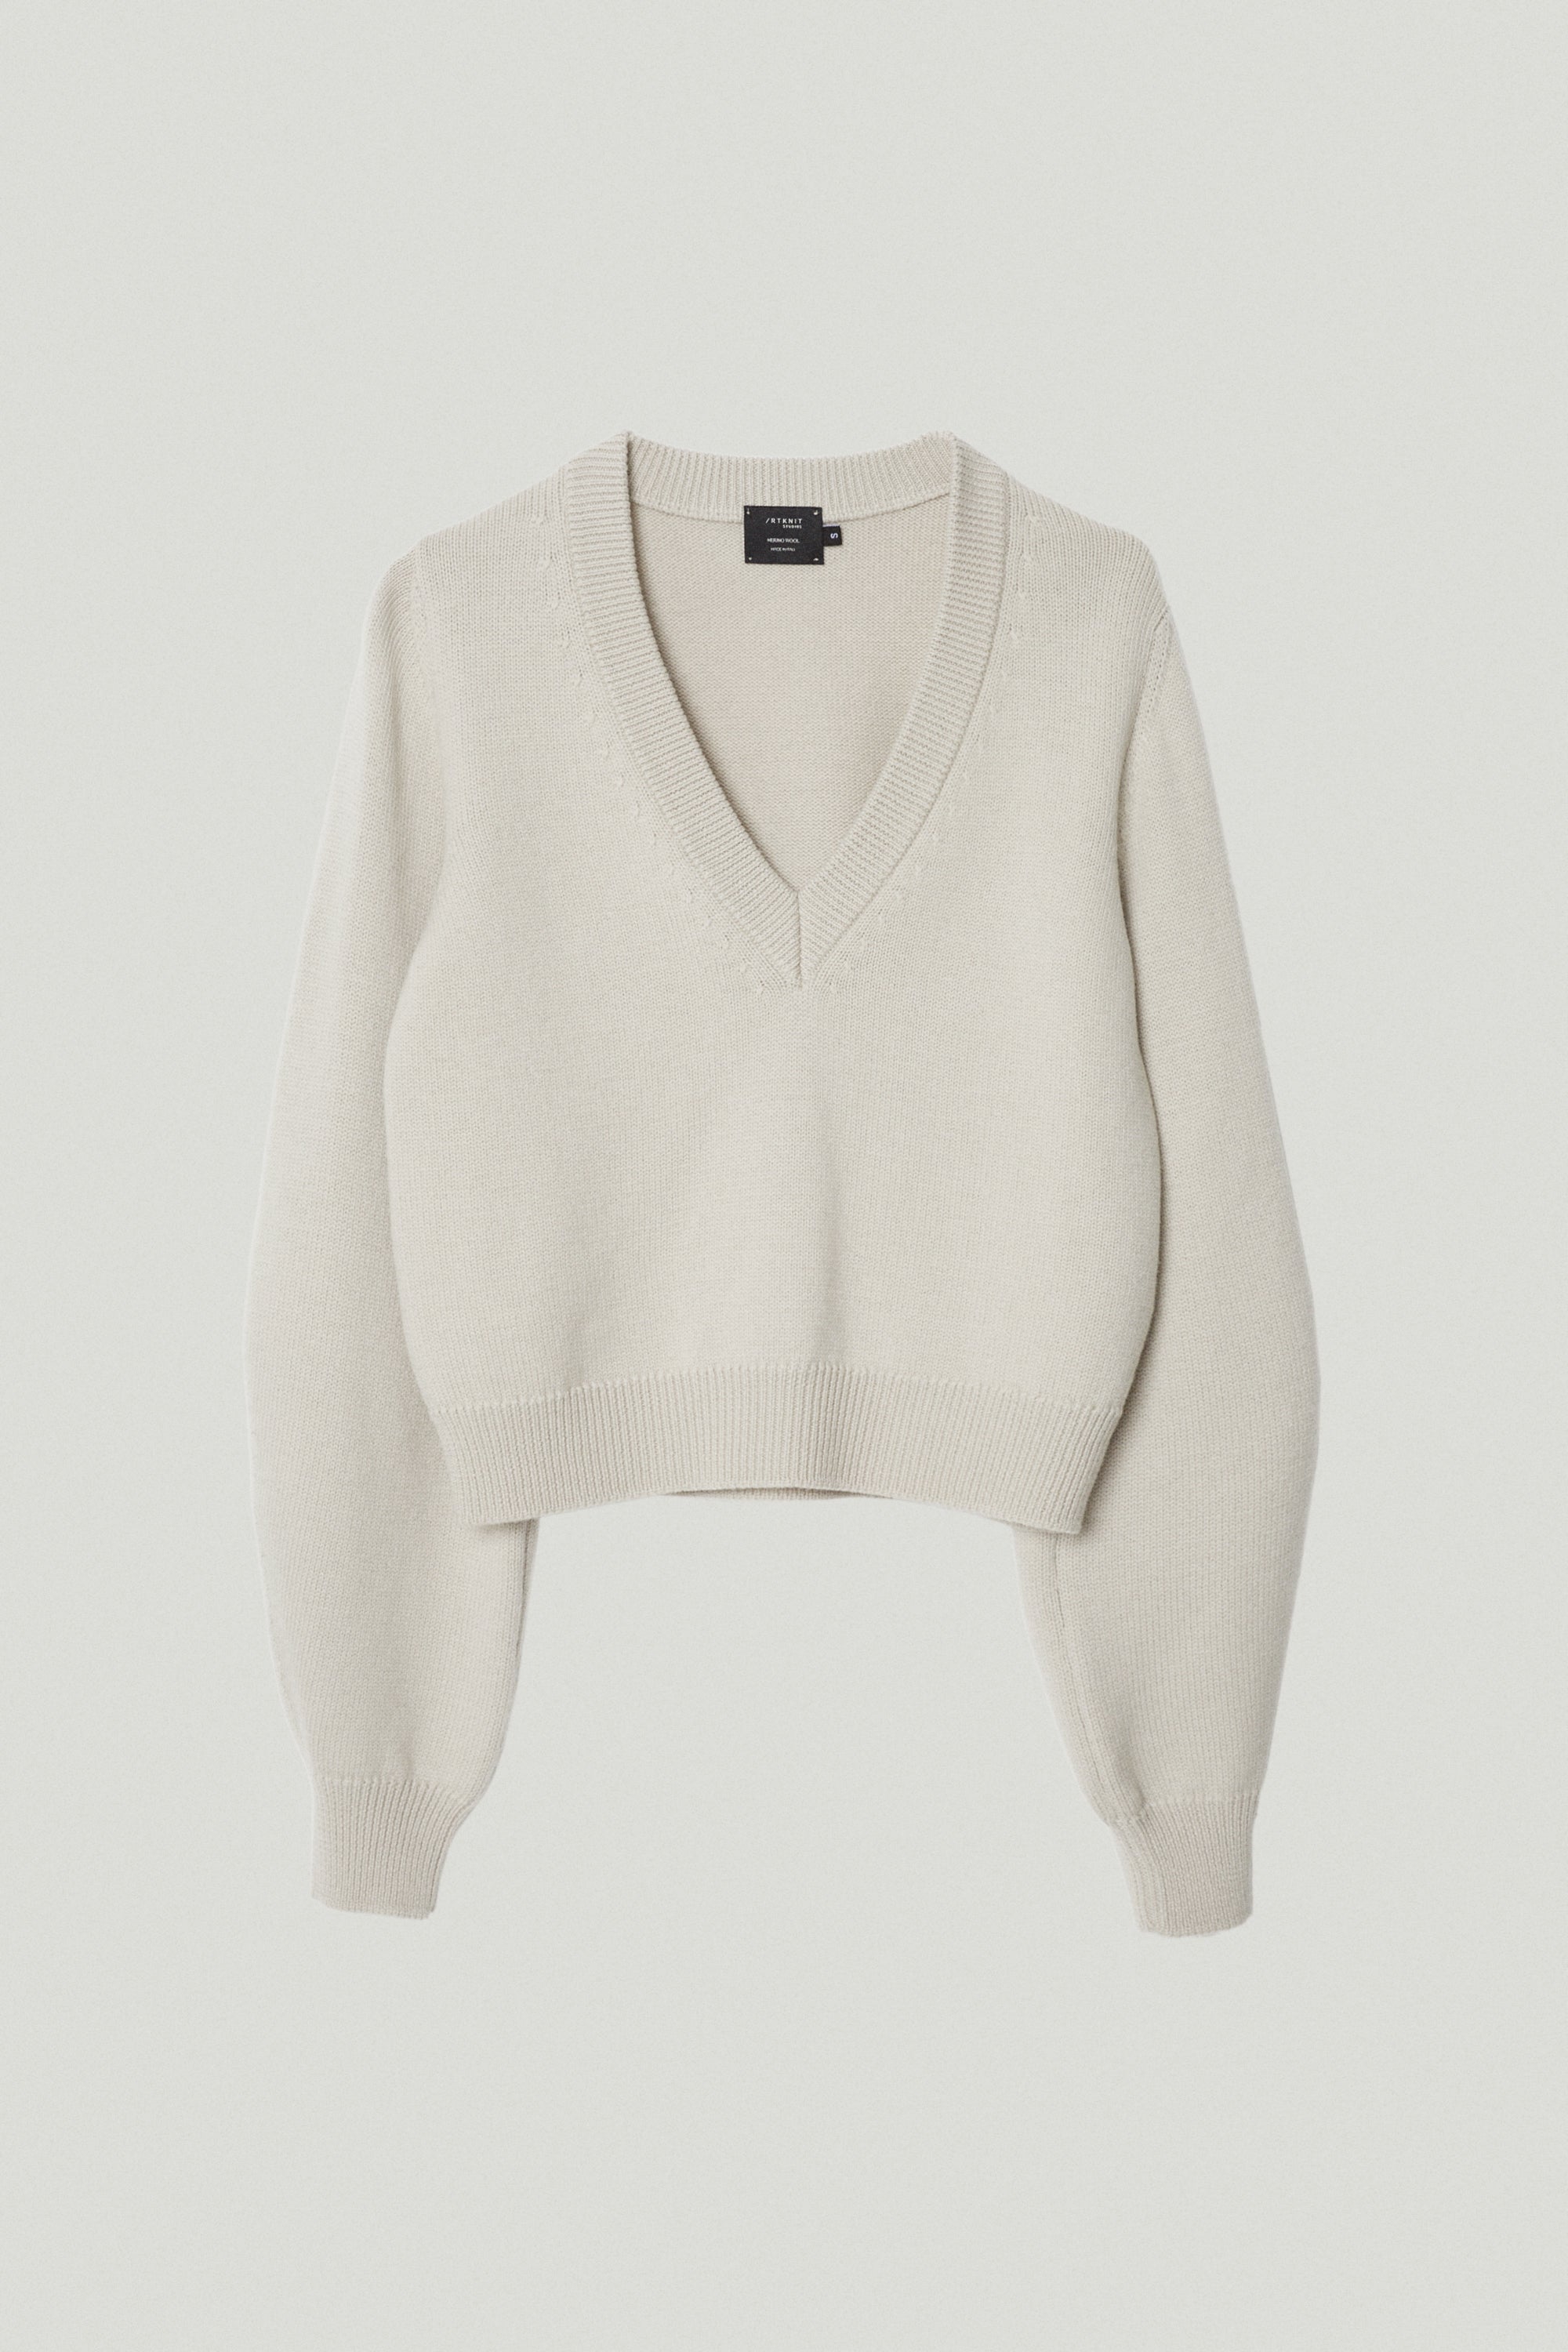 the merino wool cropped v neck pearl